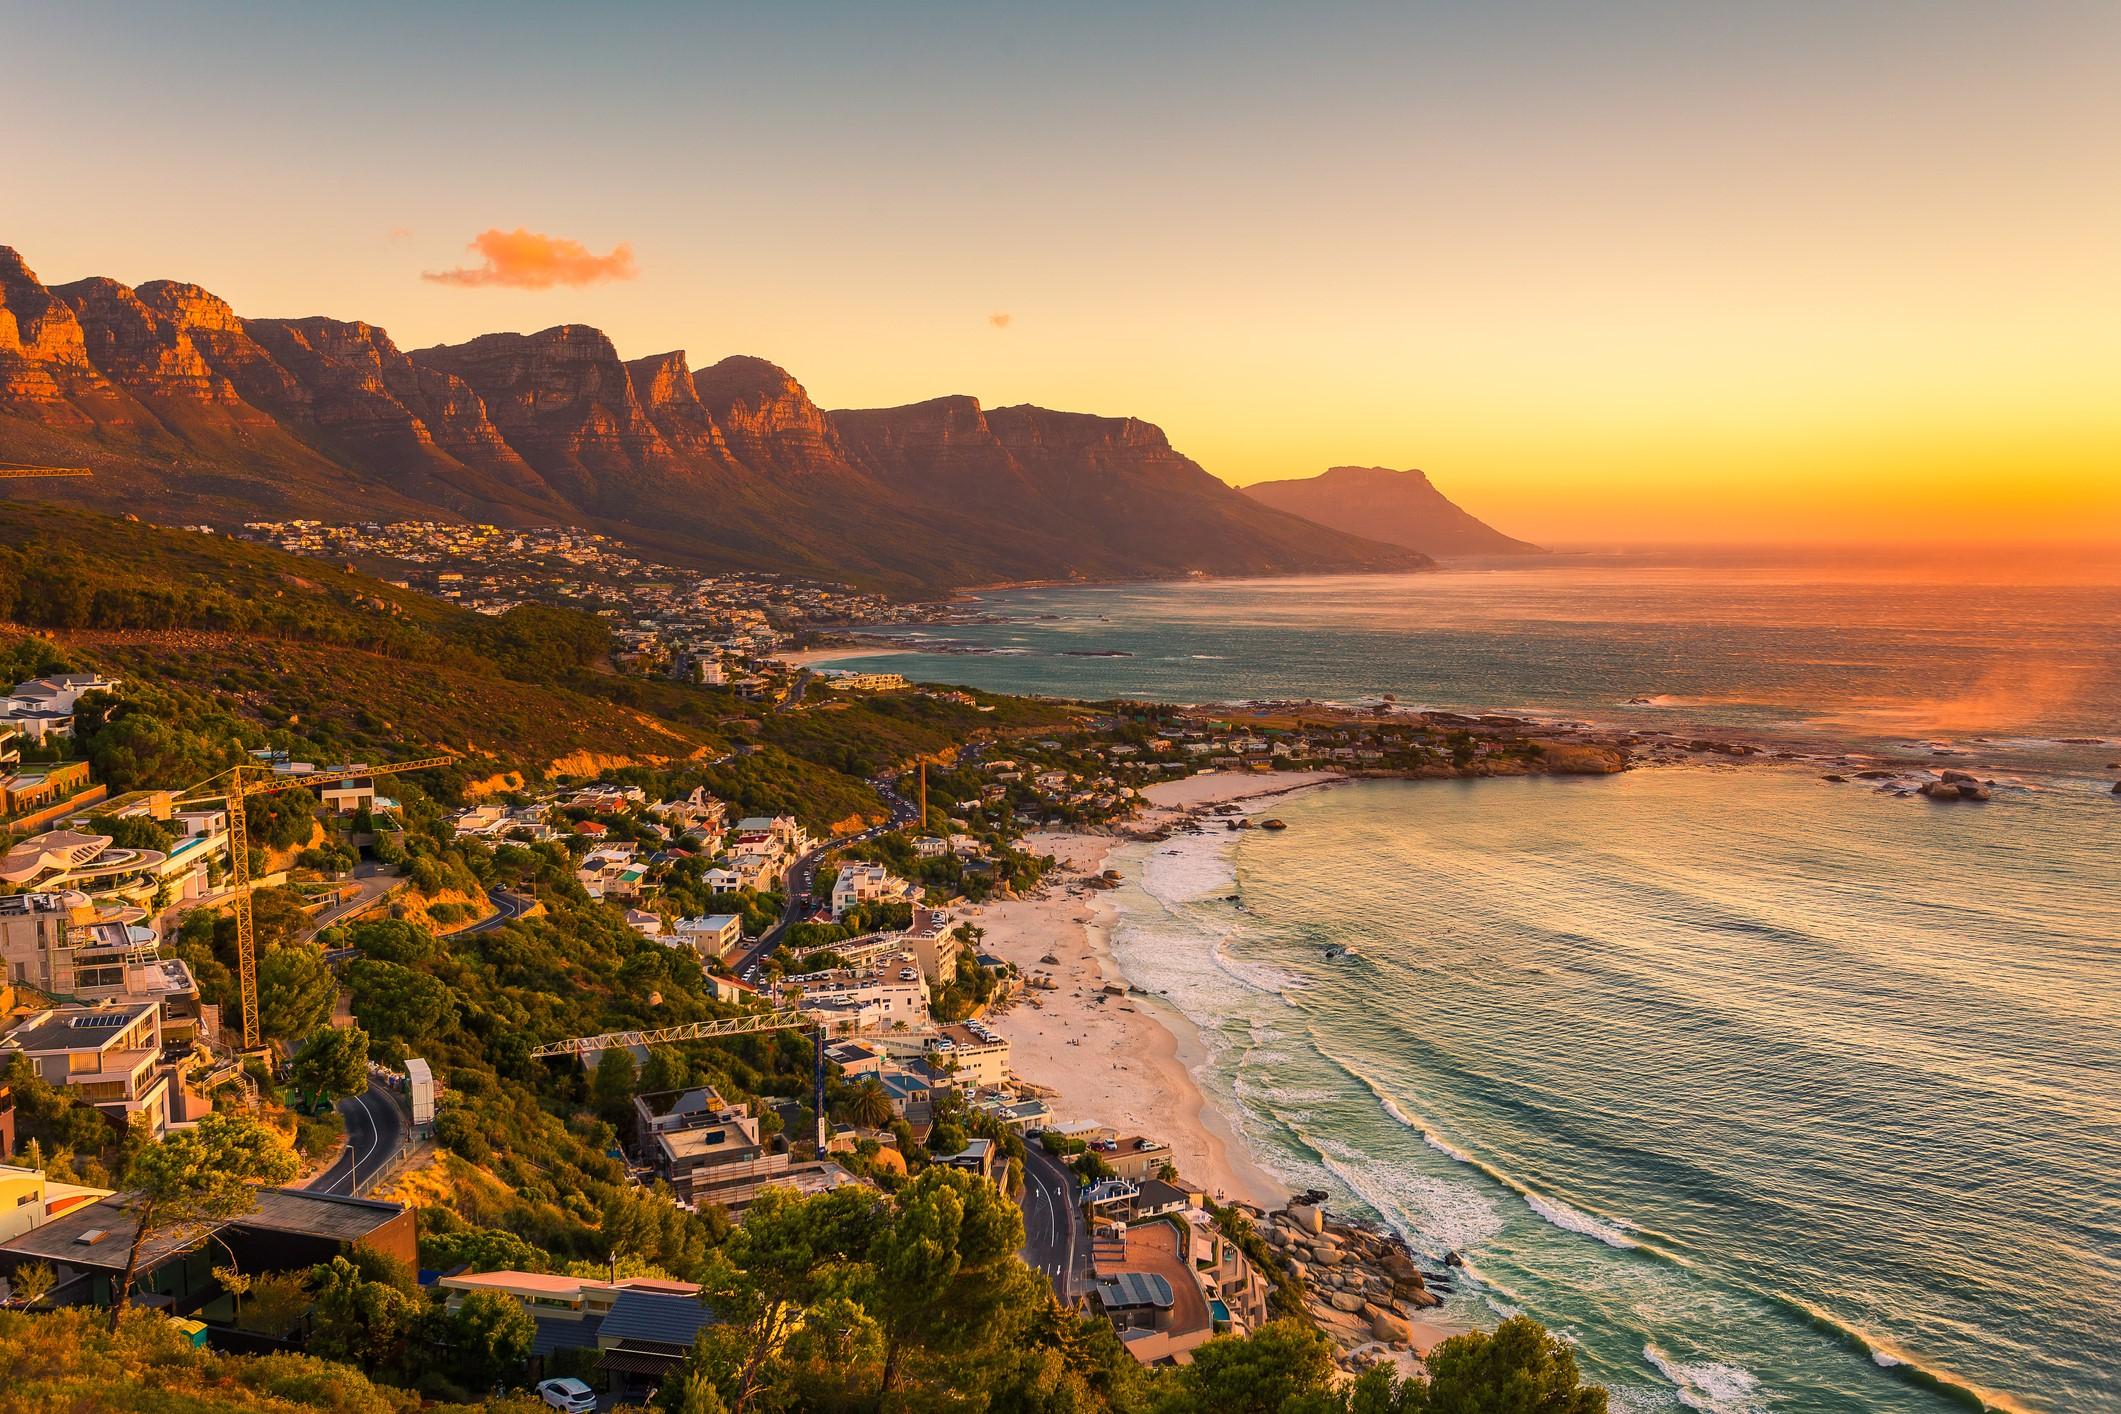 Cape Town: Andrew wants to upgrade on a group booking to South Africa